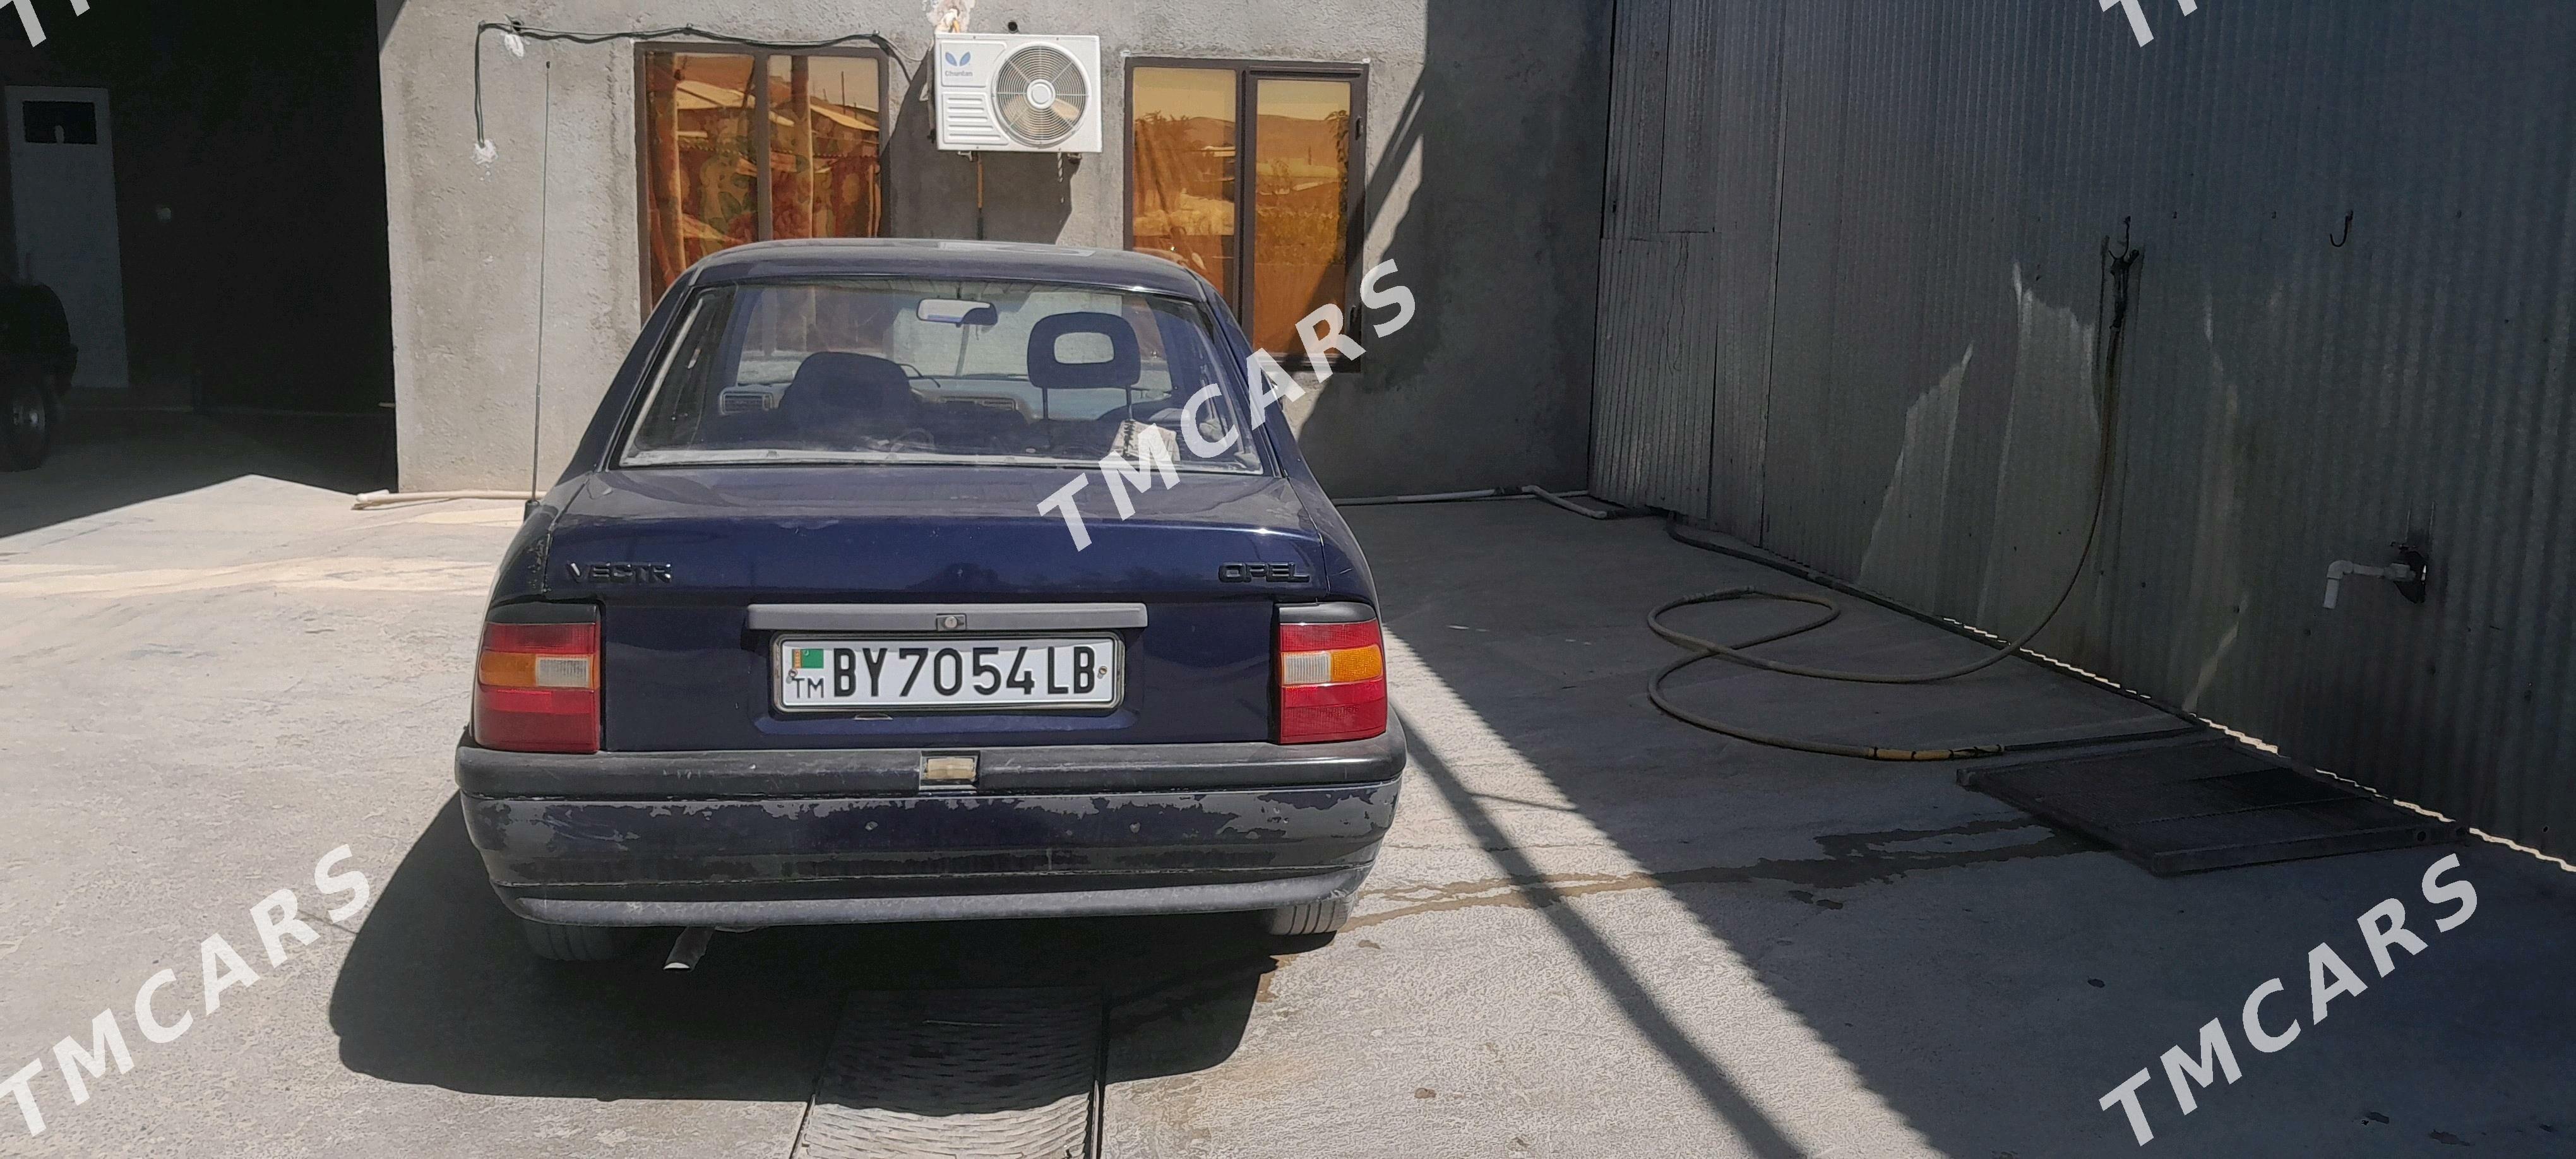 Opel Vectra 1993 - 18 000 TMT - Magdanly - img 3